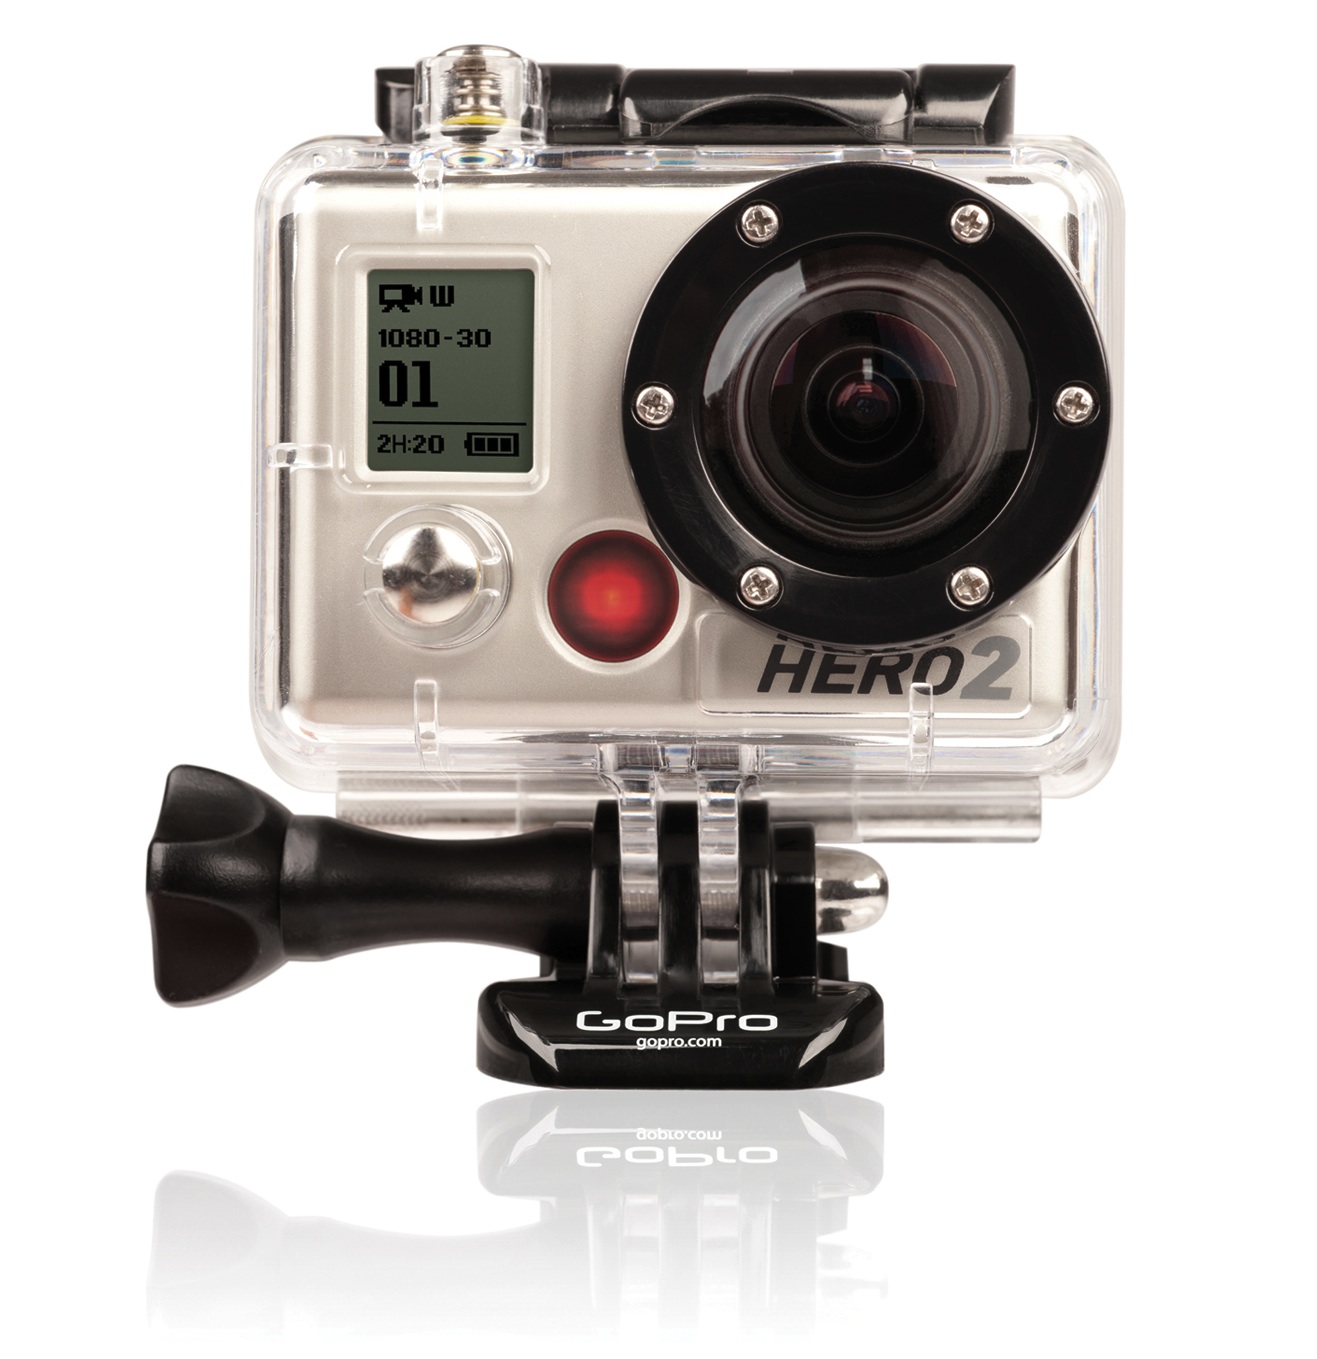 gopro hd hero2 camera is much improved with an 11-megapixel - Gopro ...